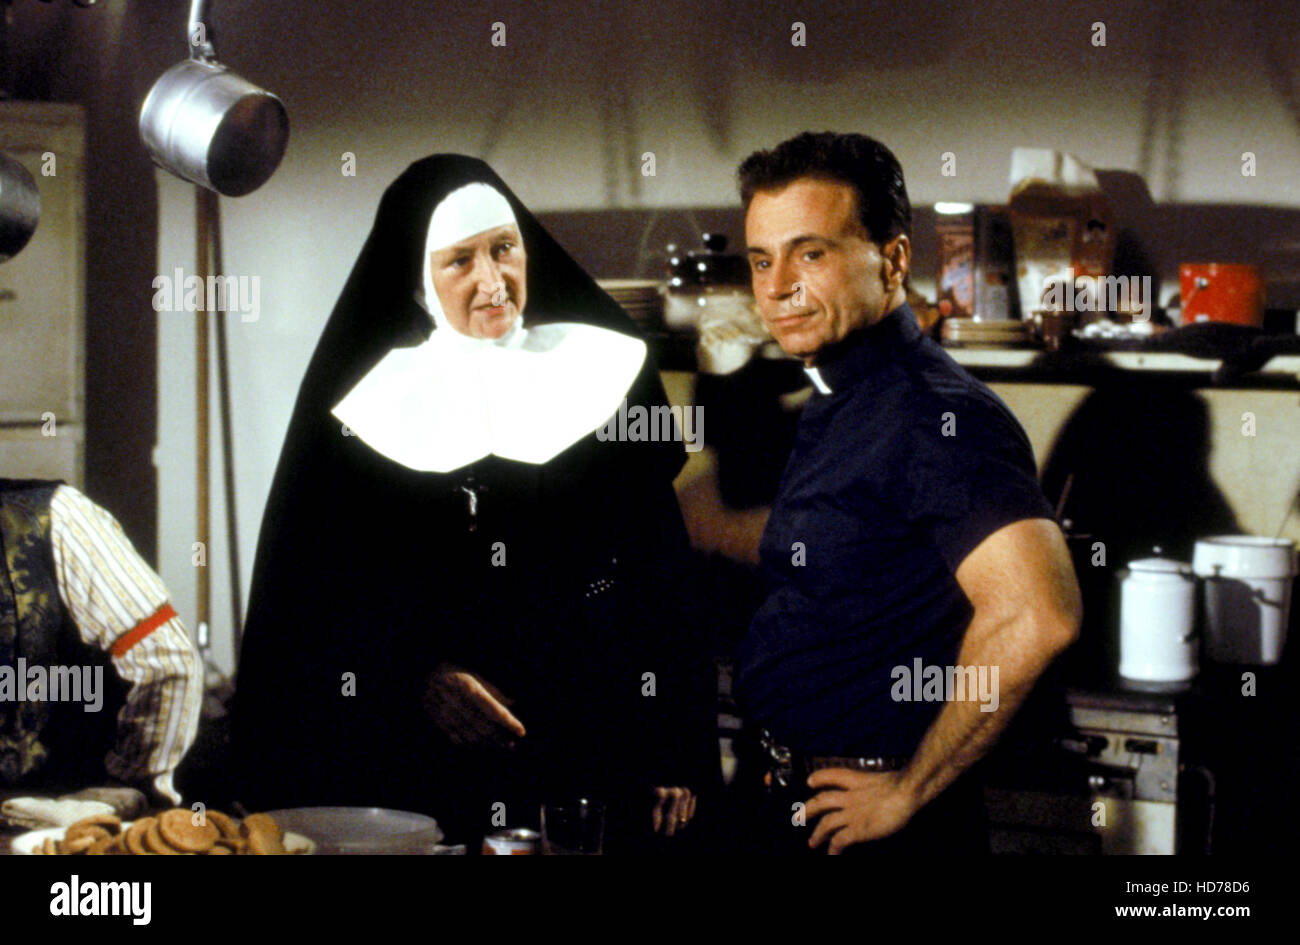 HELL TOWN, Natalie Core, Robert Blake, 1985, © Columbia Pictures Television / Courtesy: Everett Collection Stock Photo